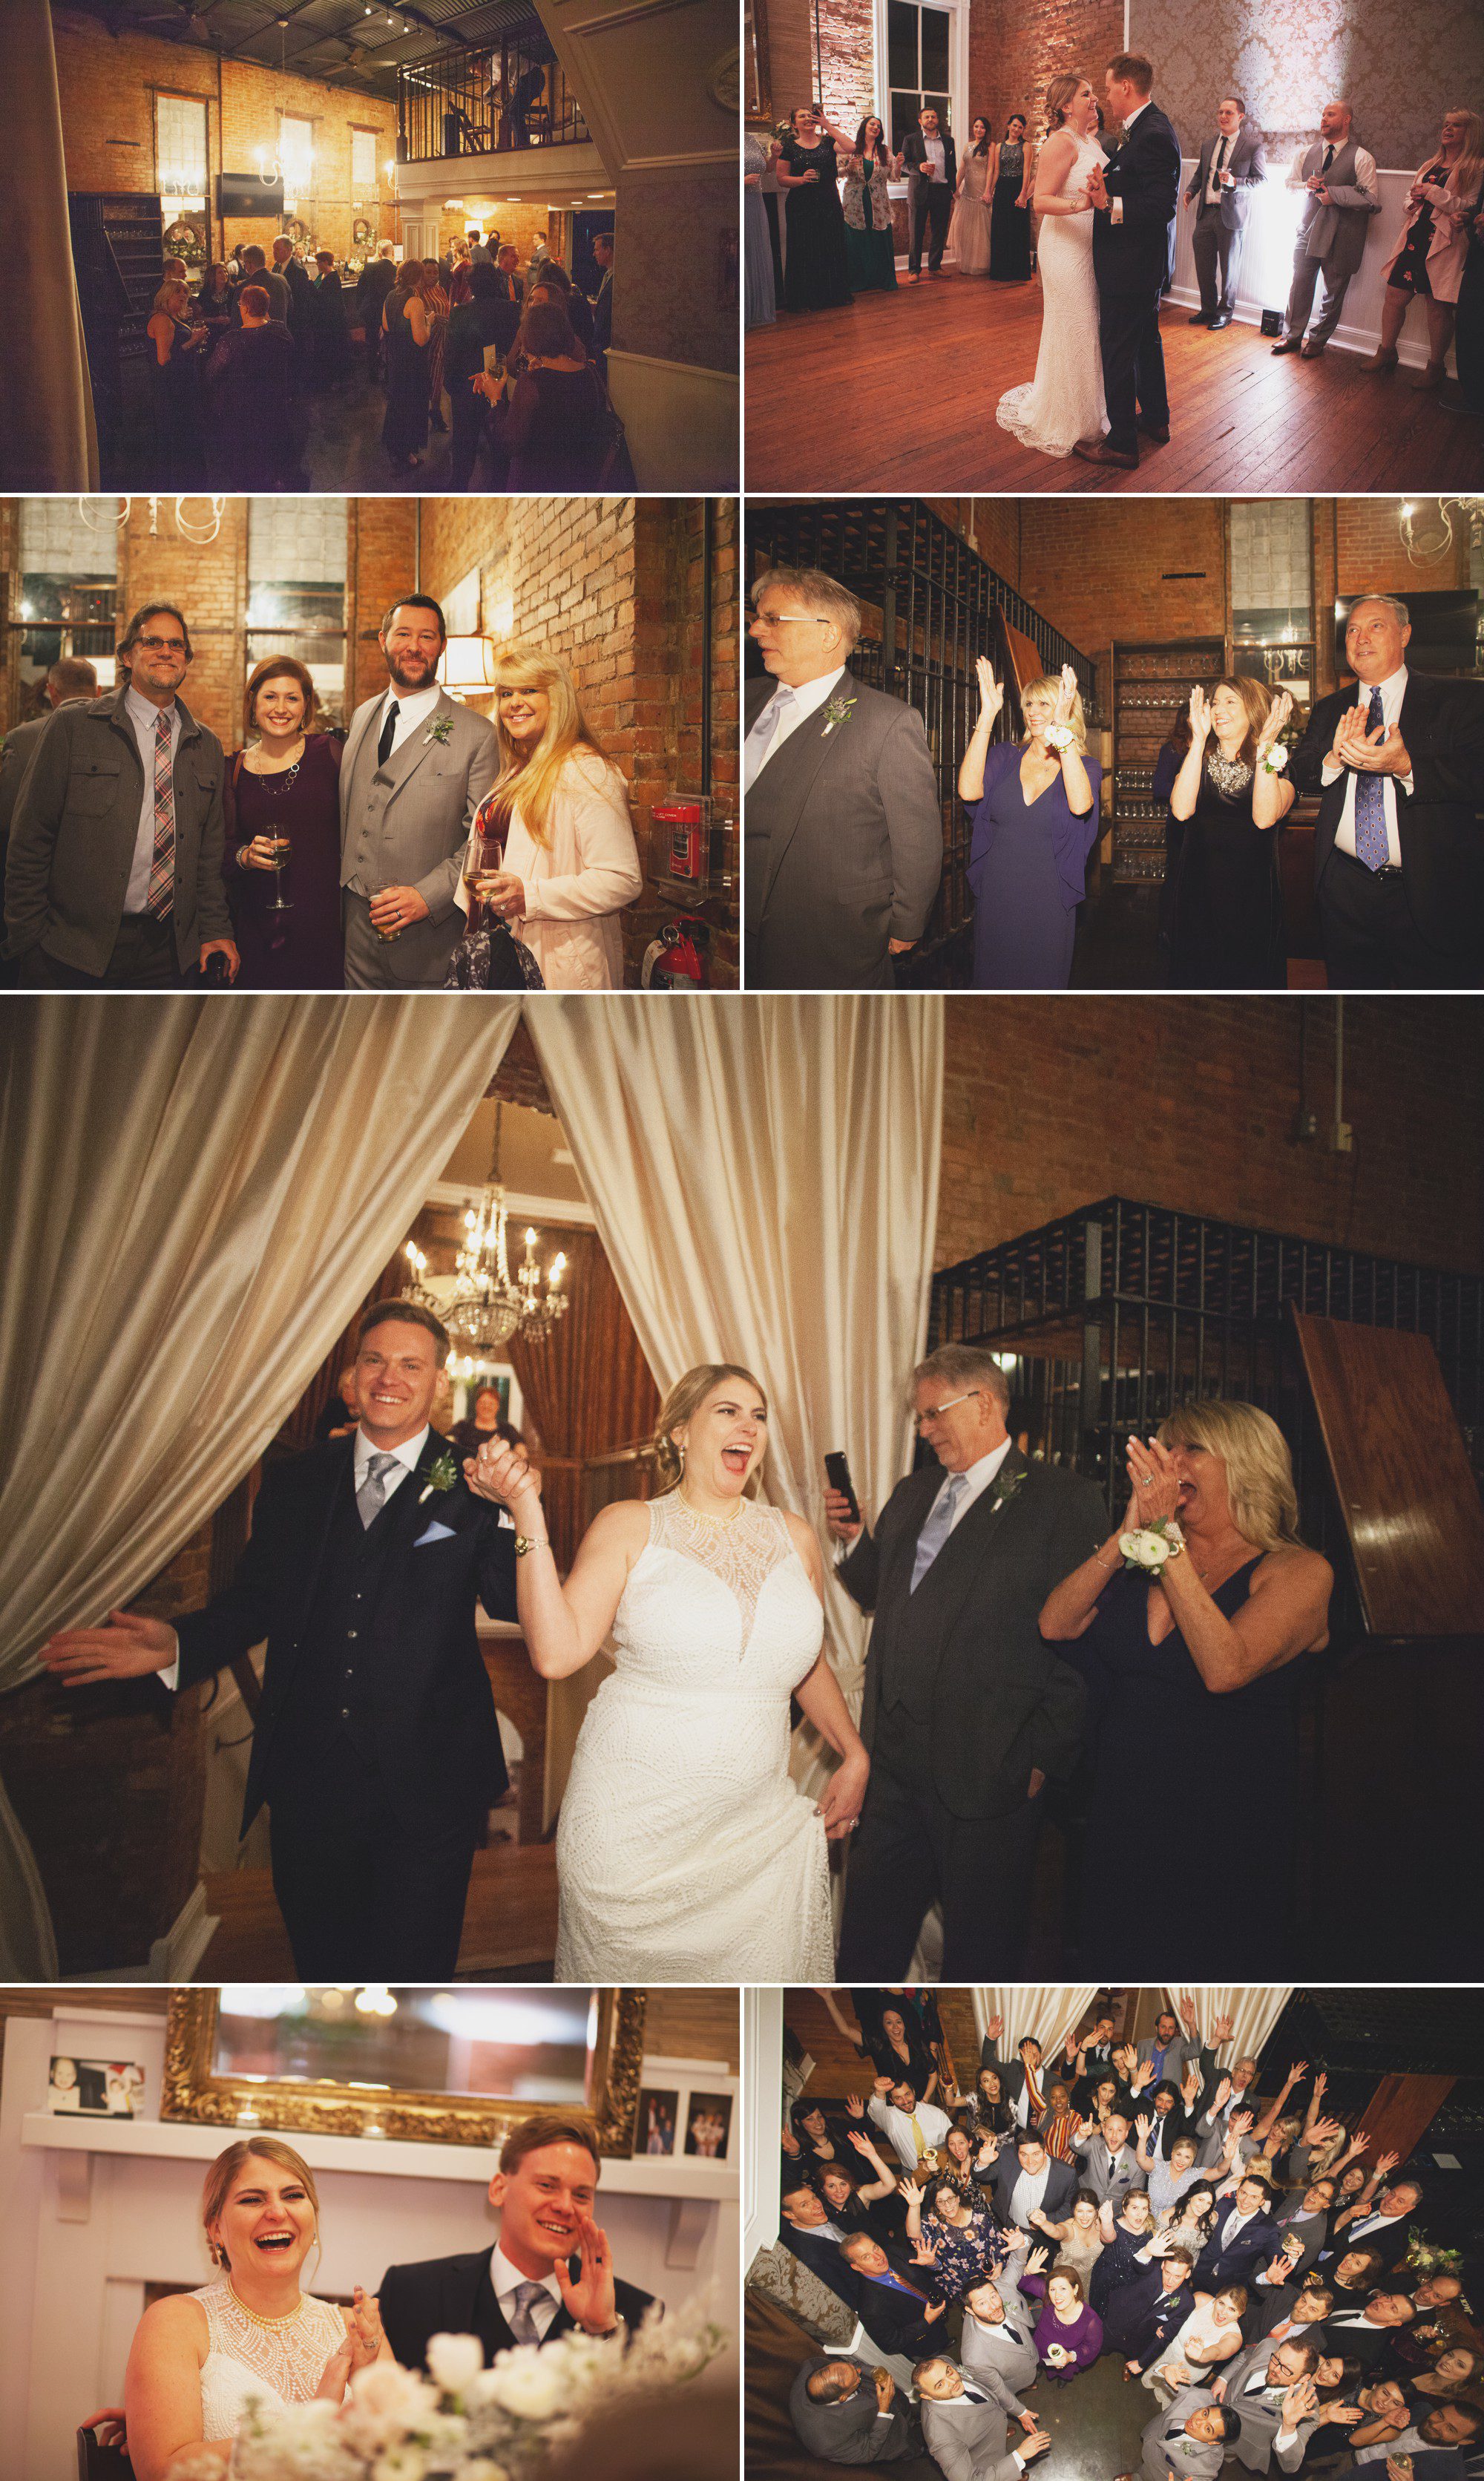 Night reception and dancing at McConnell House in Franklin, TN before wedding ceremony. Photos by Krista Lee Photography Nashville, TN